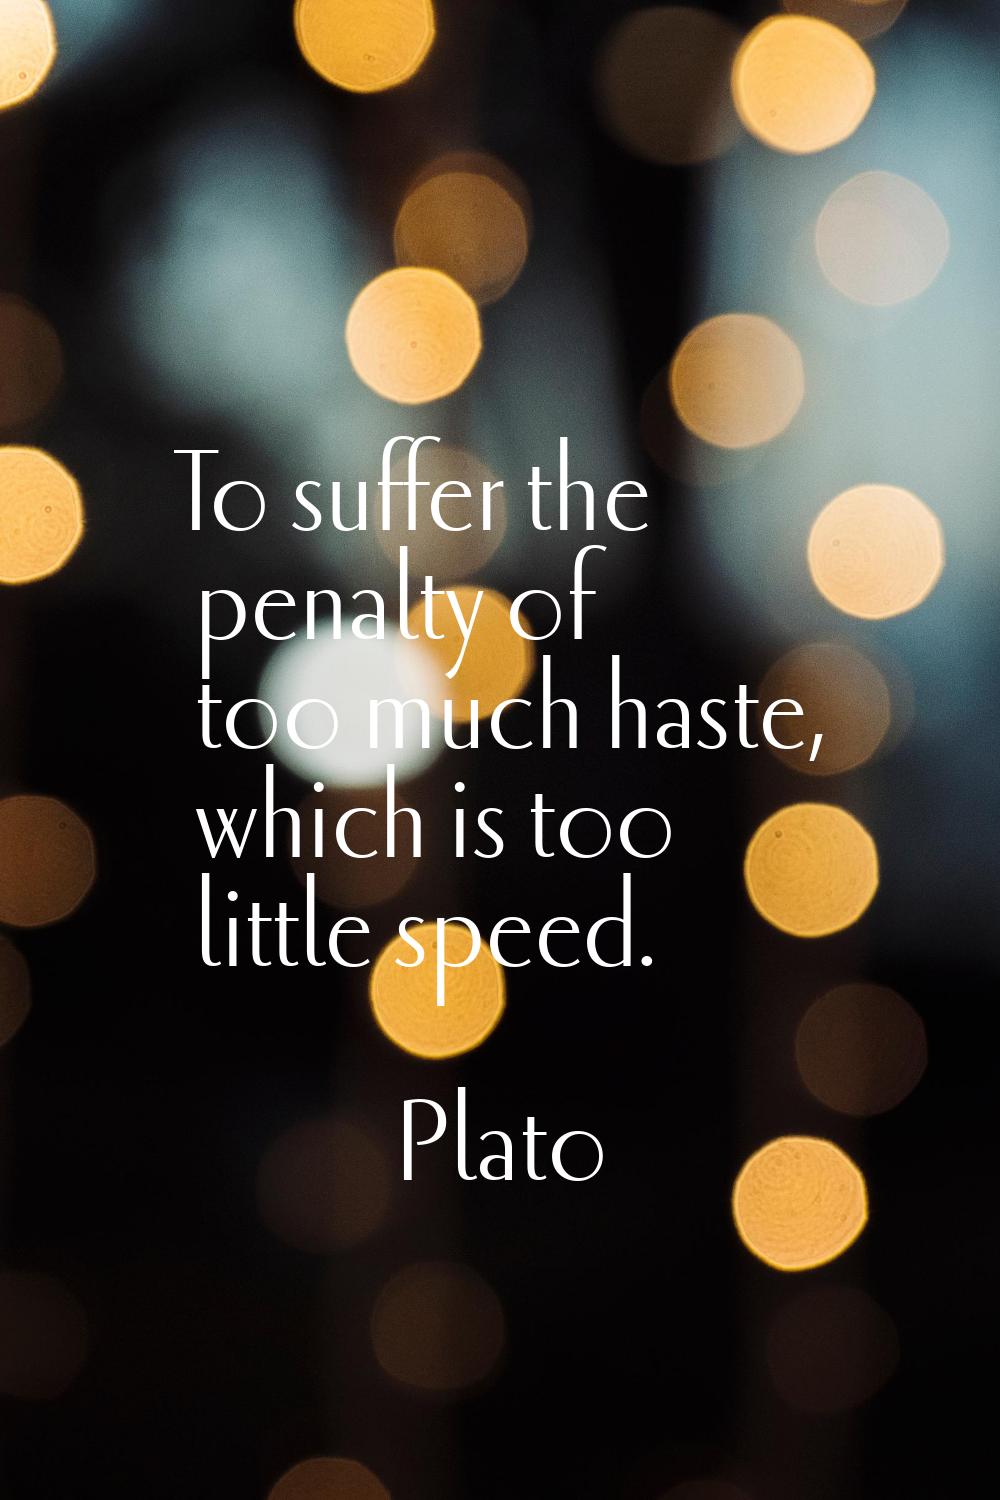 To suffer the penalty of too much haste, which is too little speed.